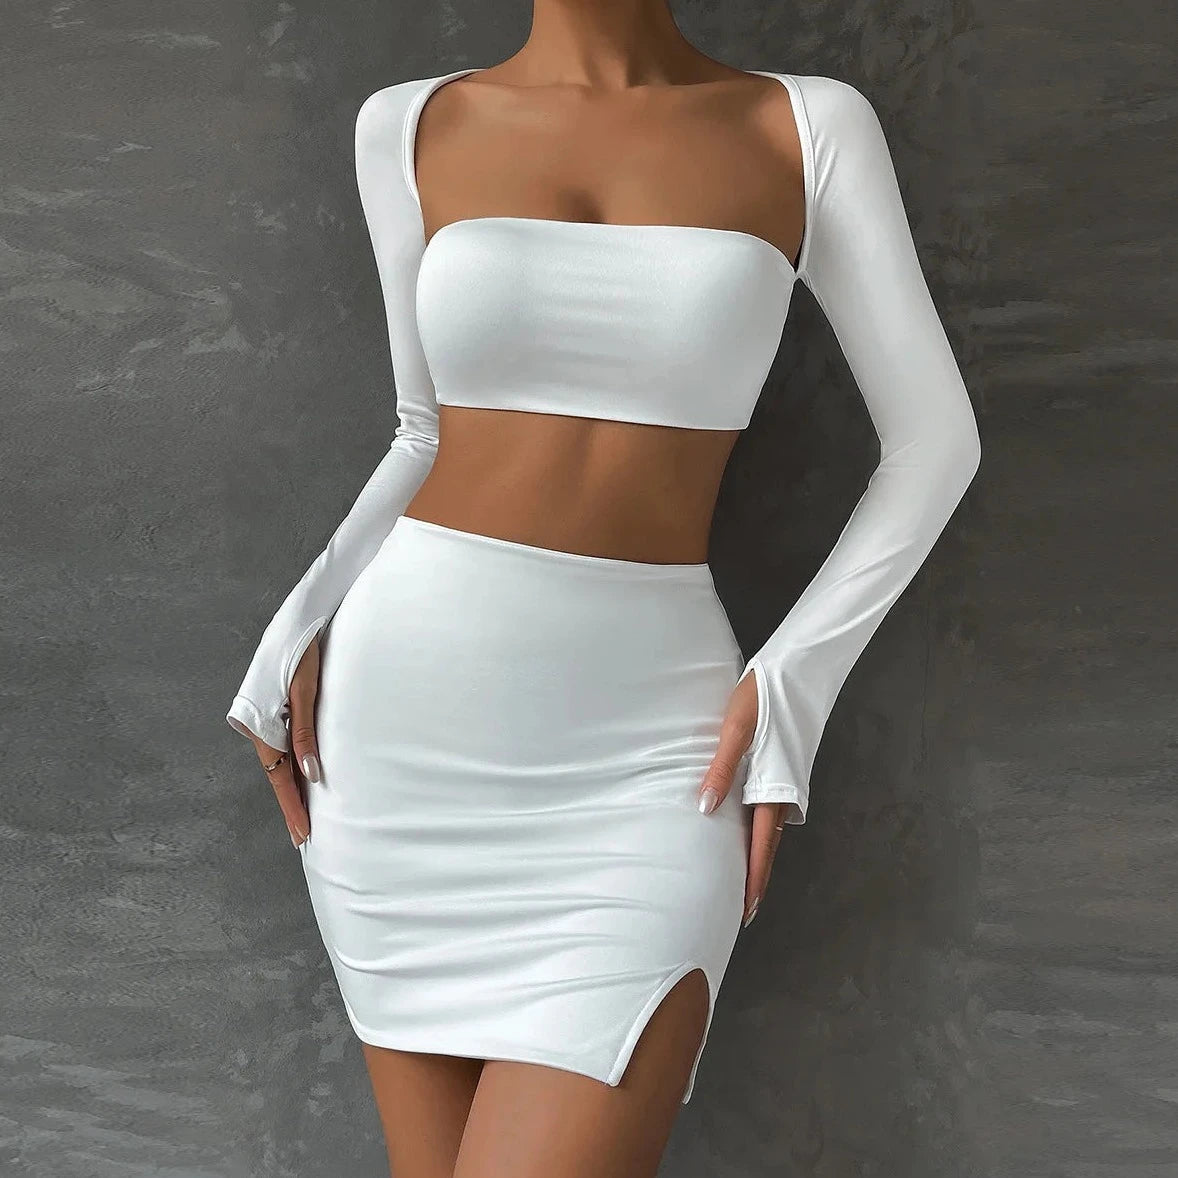 Long Sleeve Crop Top And Mini Skirt - Verostyle